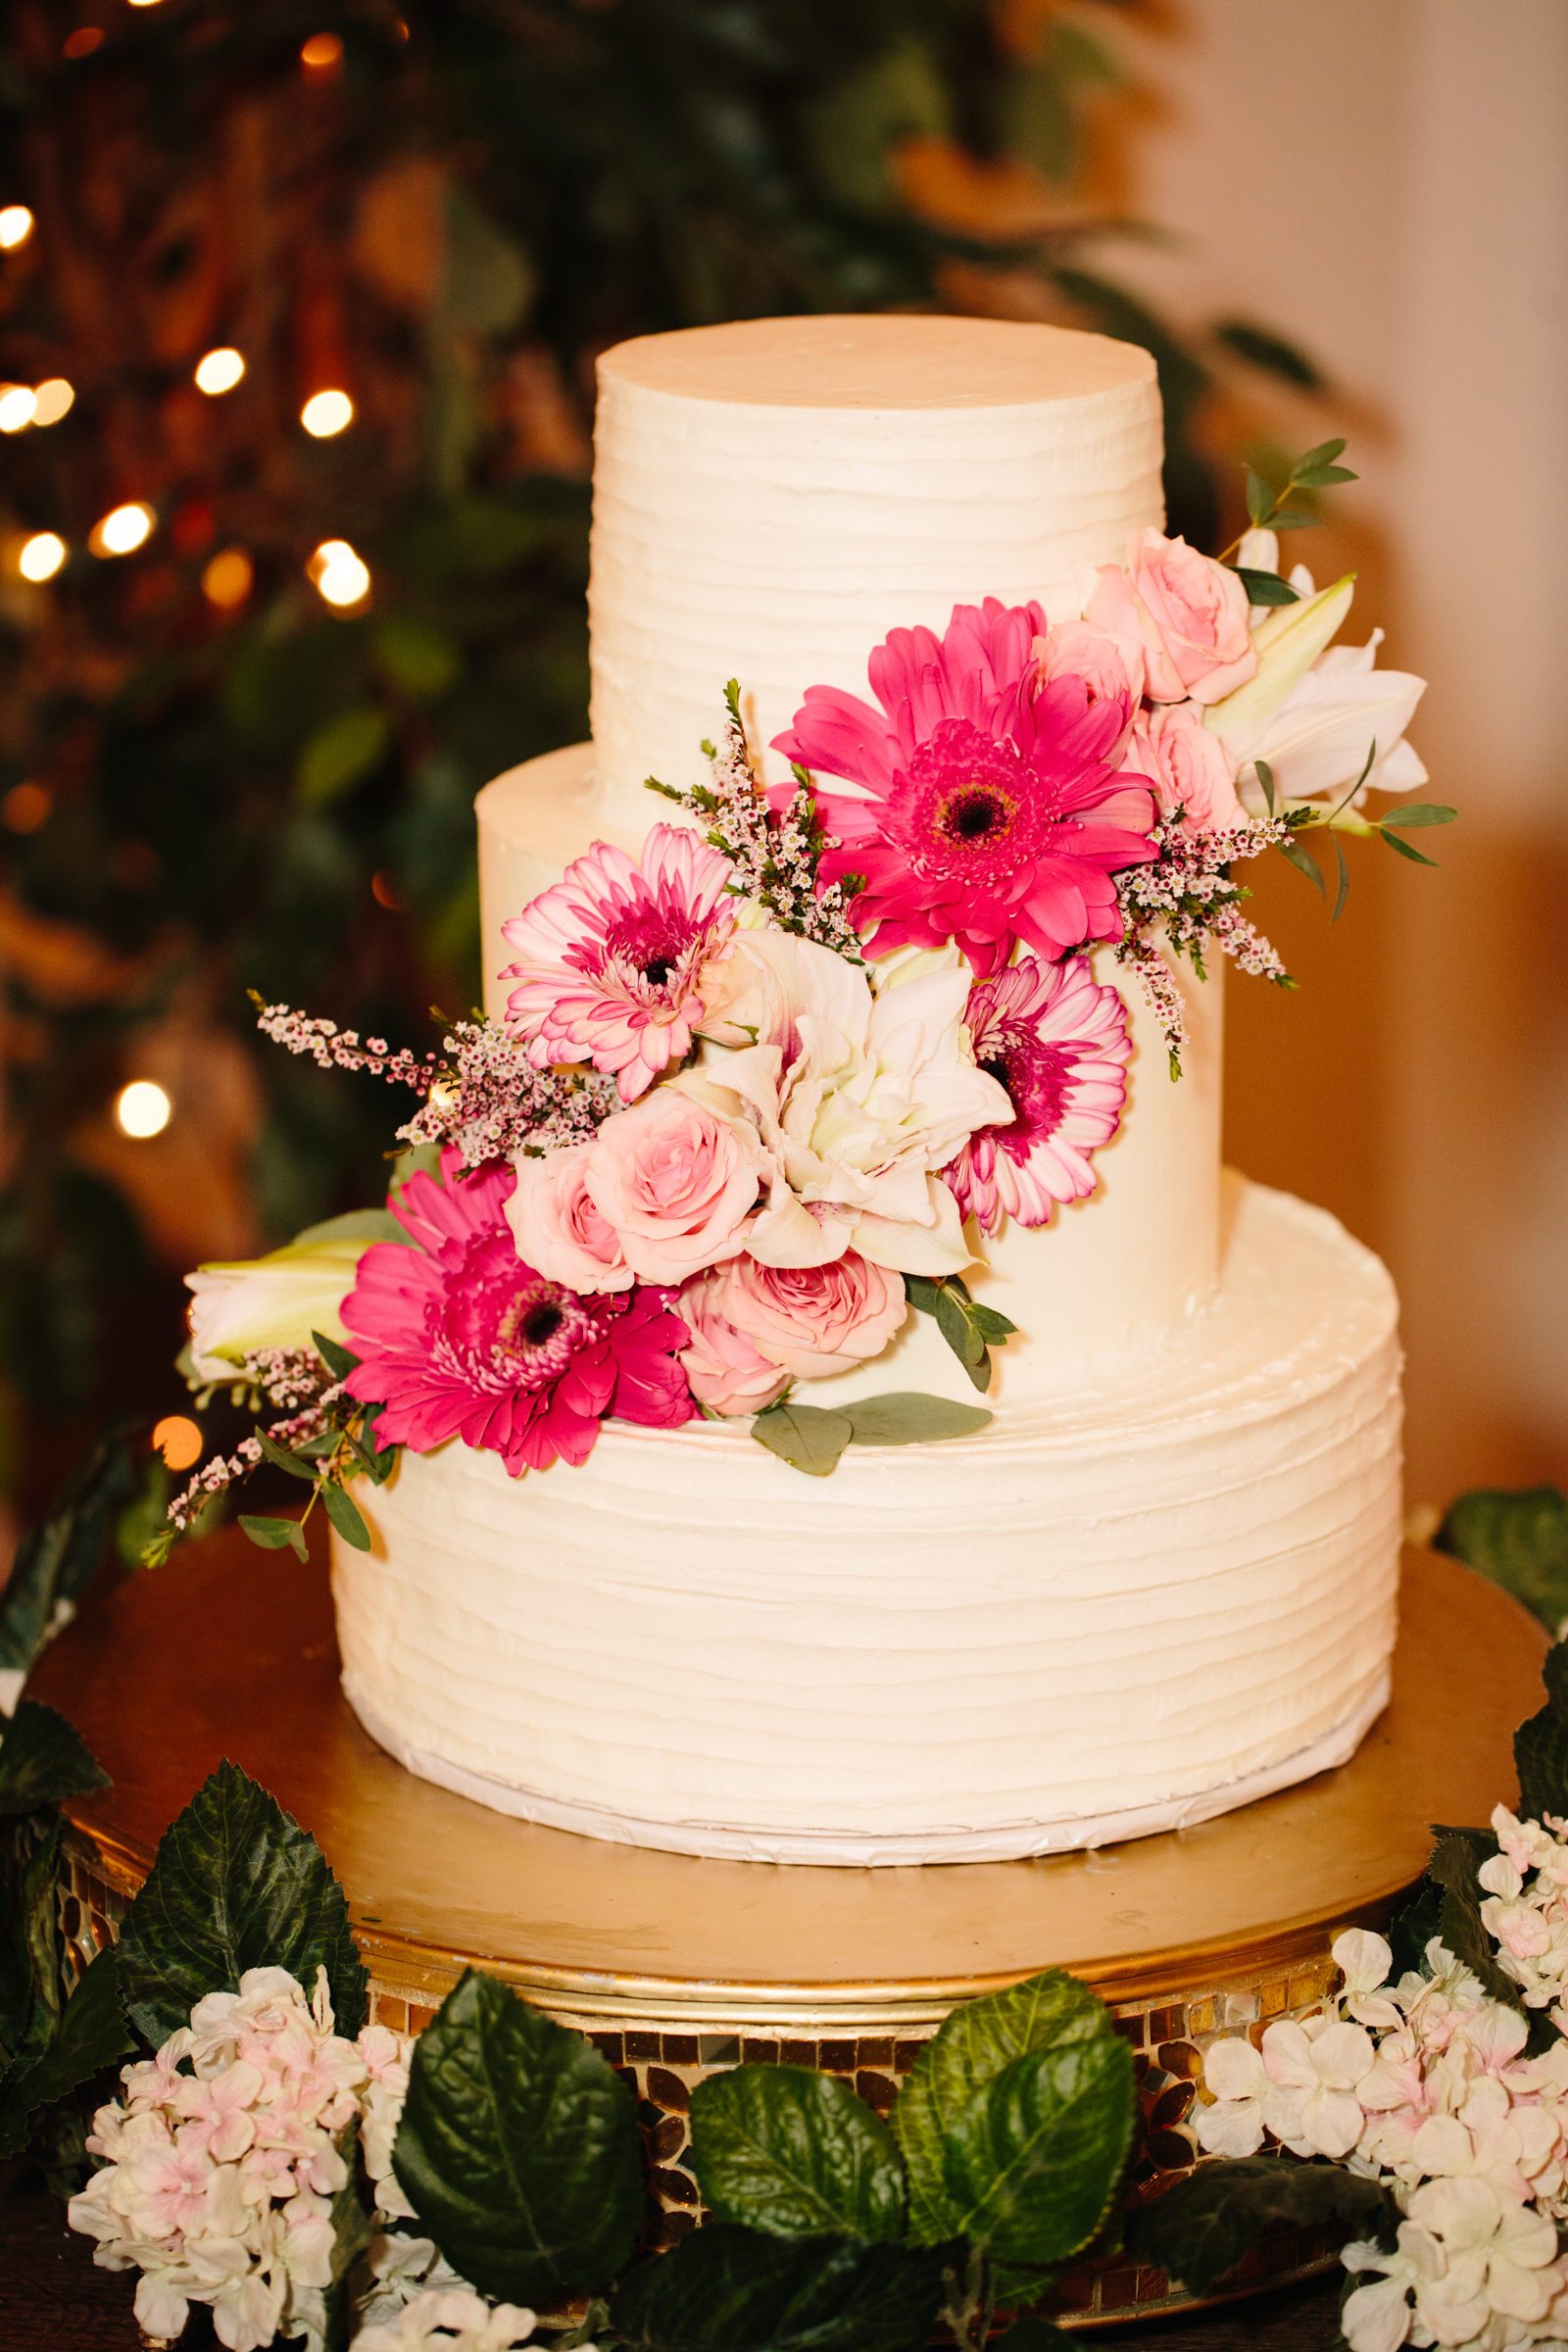 three tier white wedding cake with pink florals from aPocatello wedding bakery